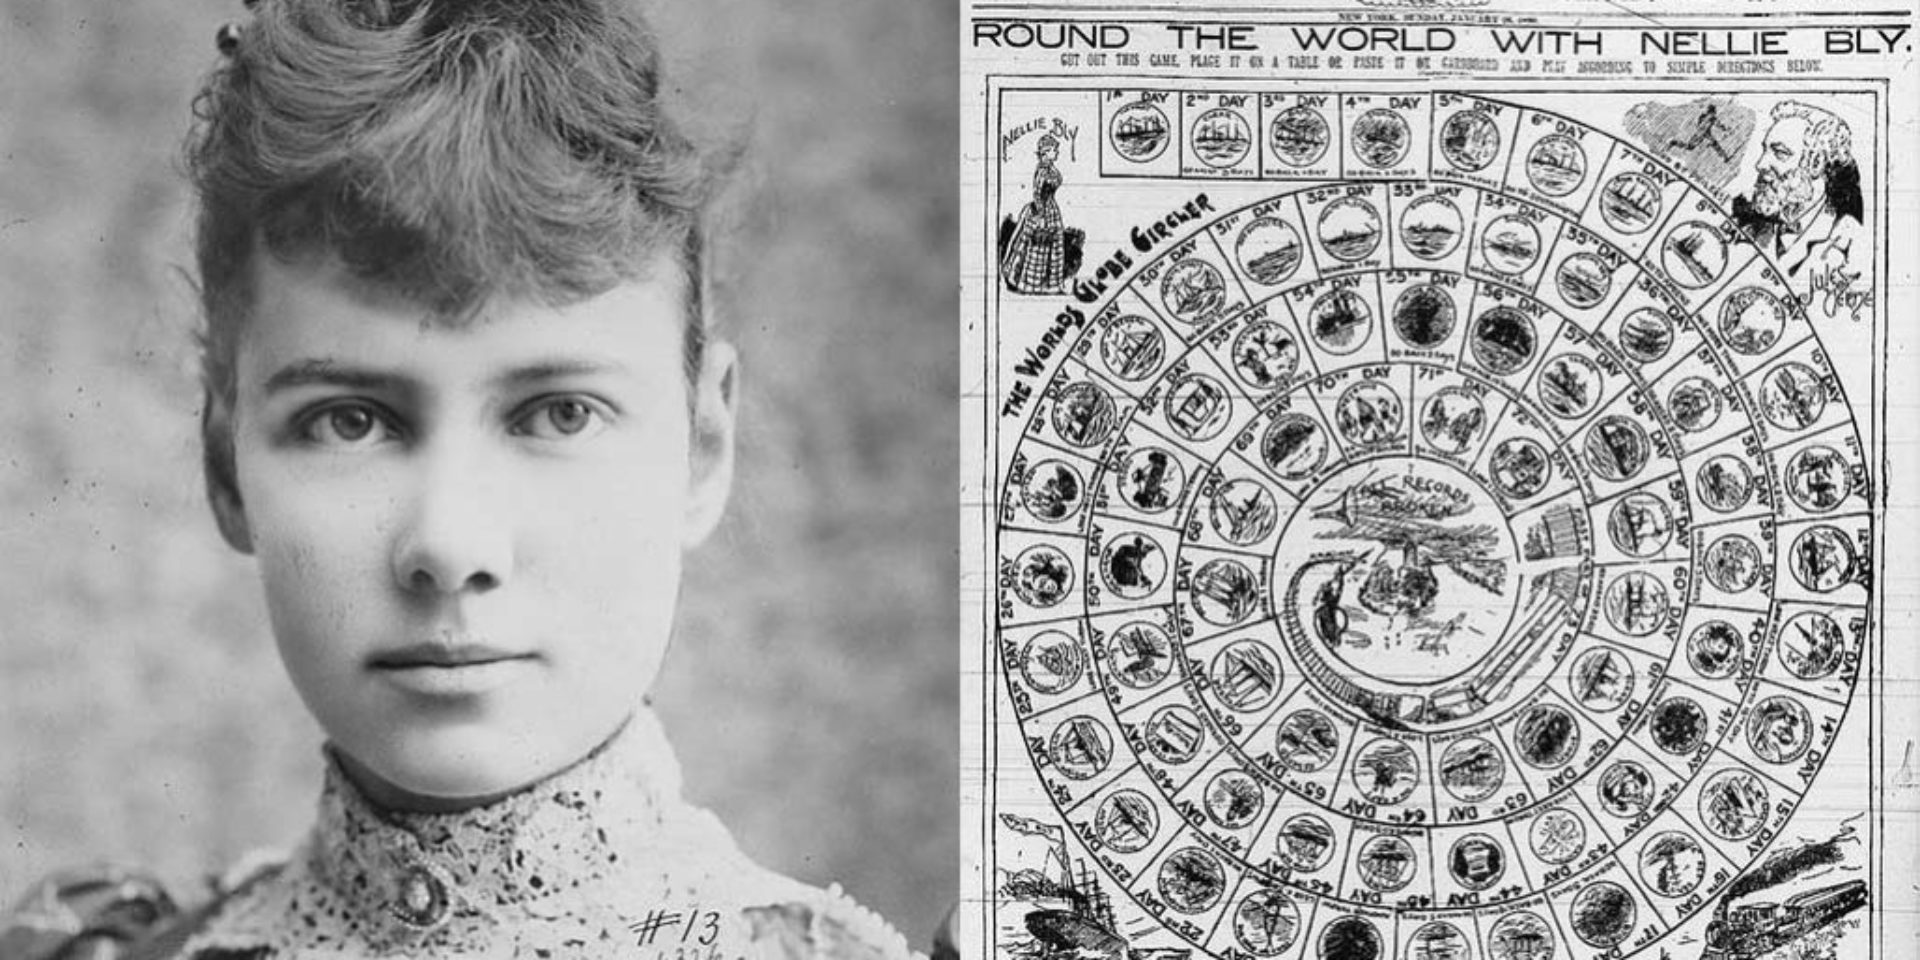 Around the World in Seventy-Two Days with Nellie Bly